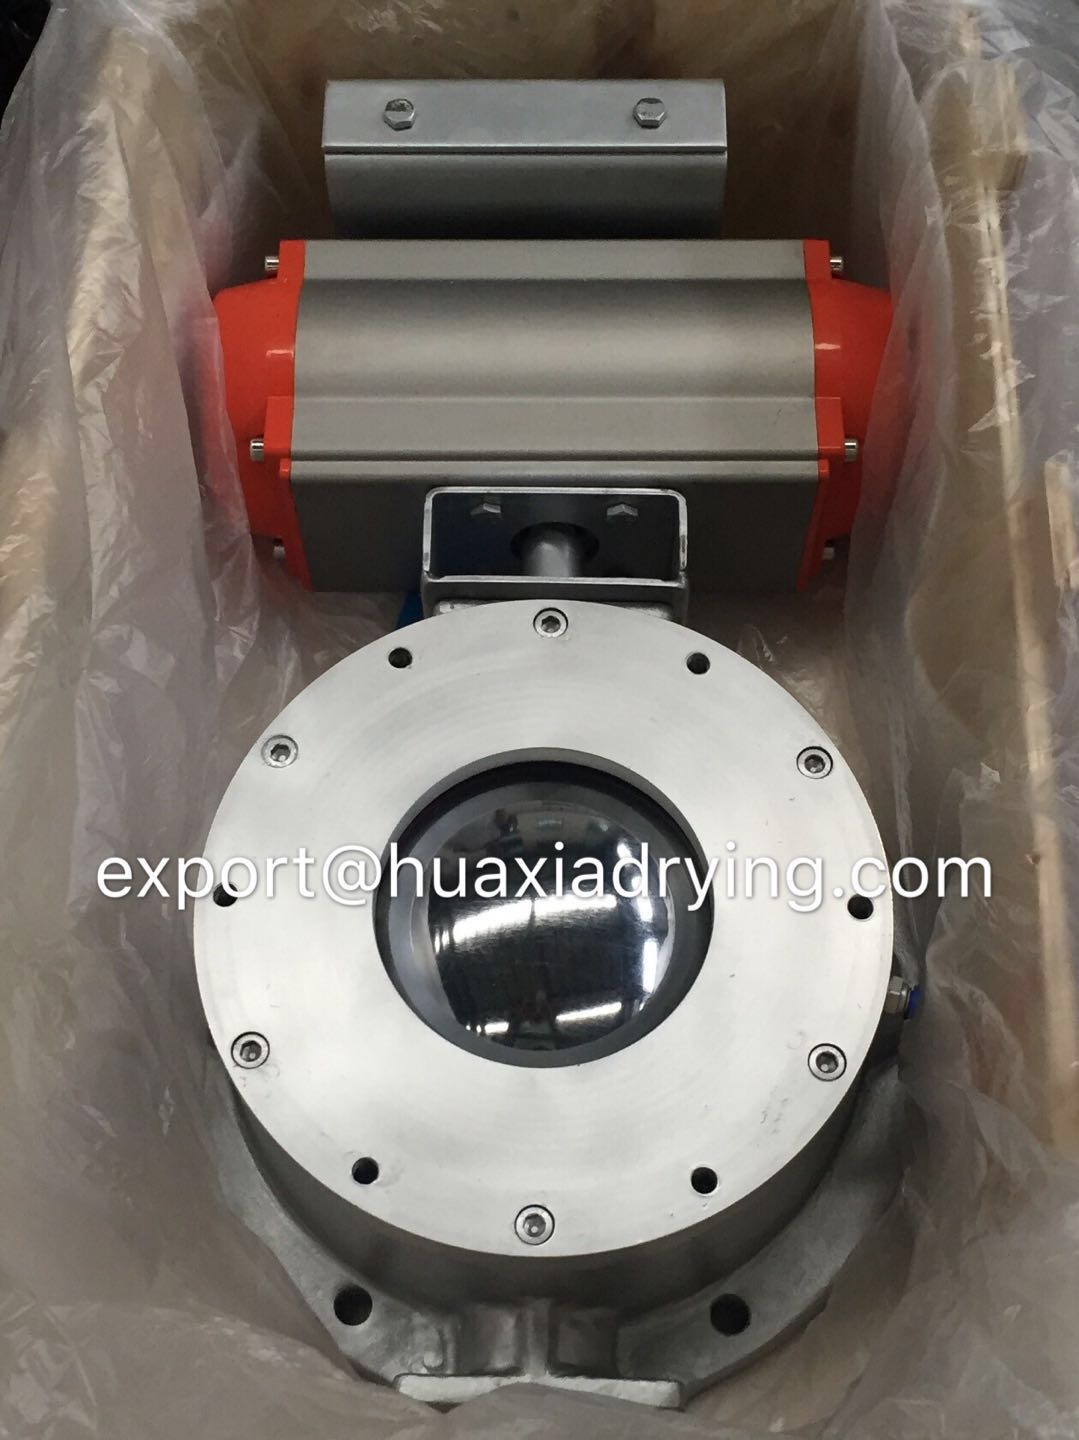 Inflatable dome valve